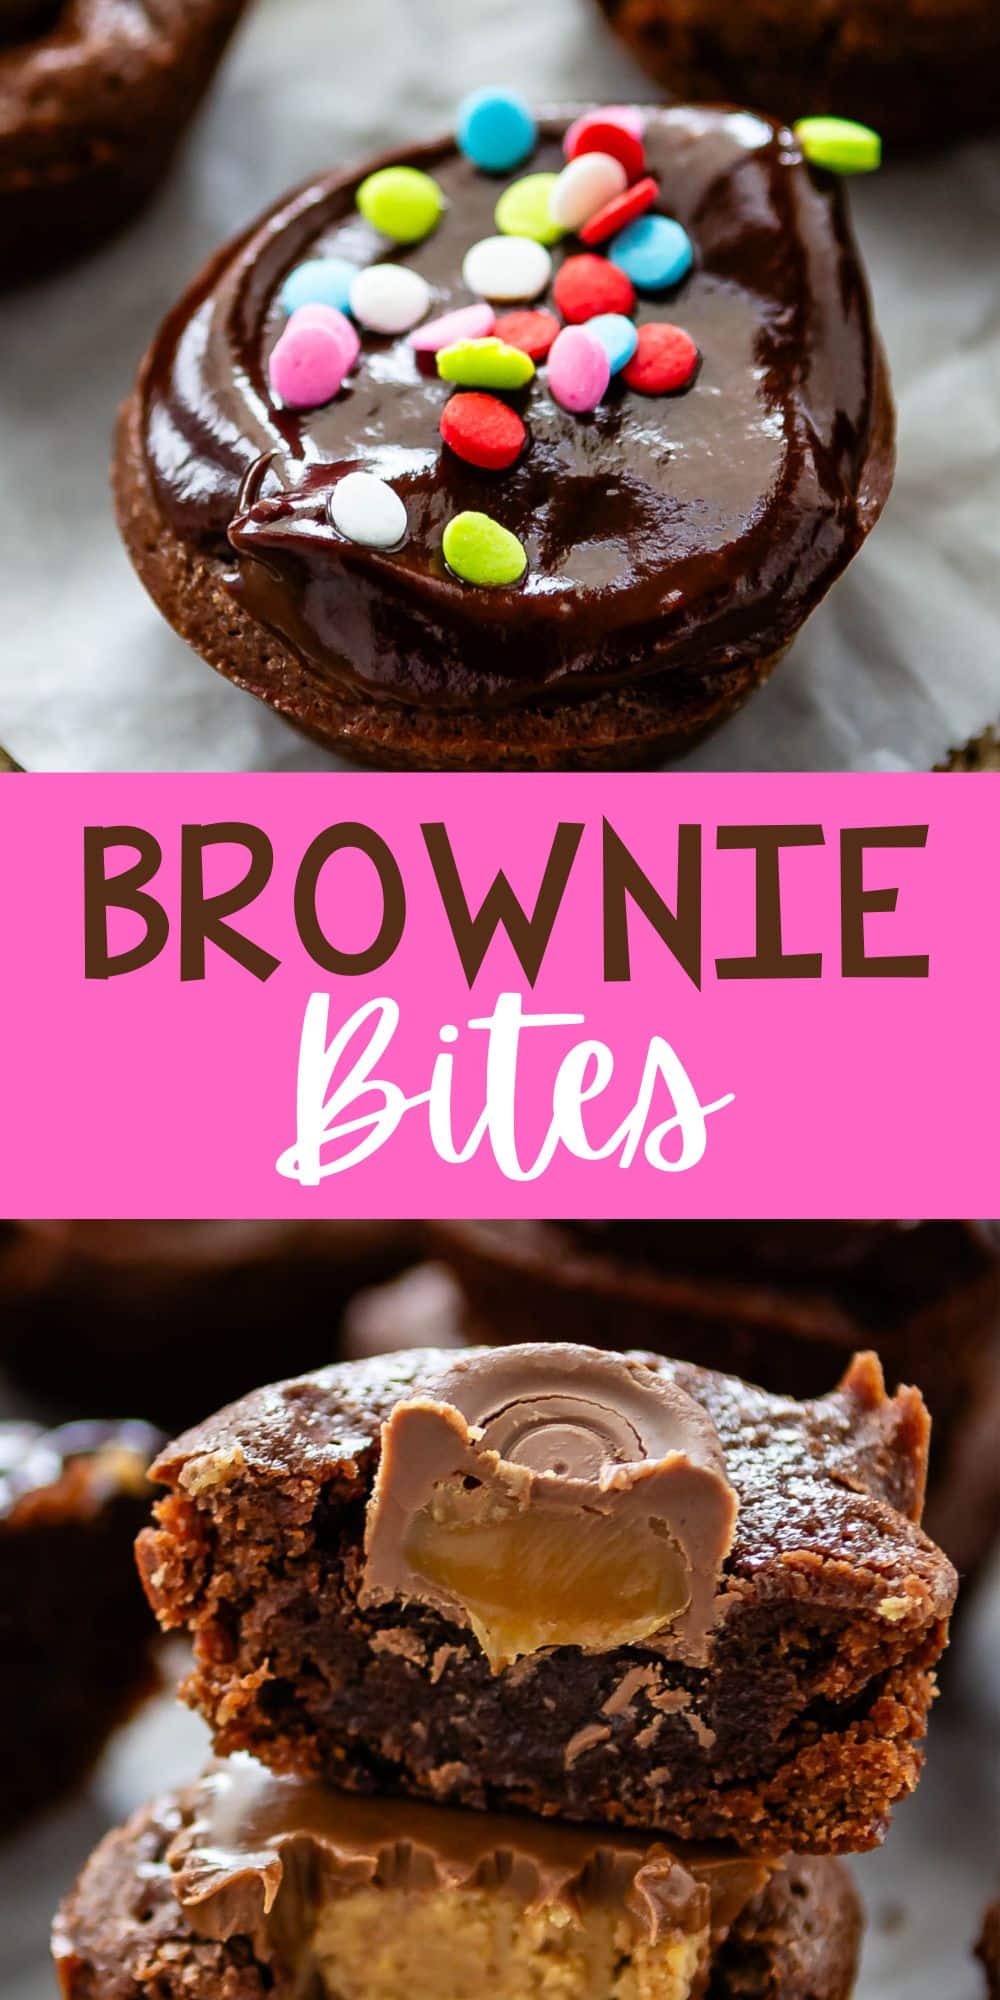 two photos of brownies bites in different styles with words on the image.